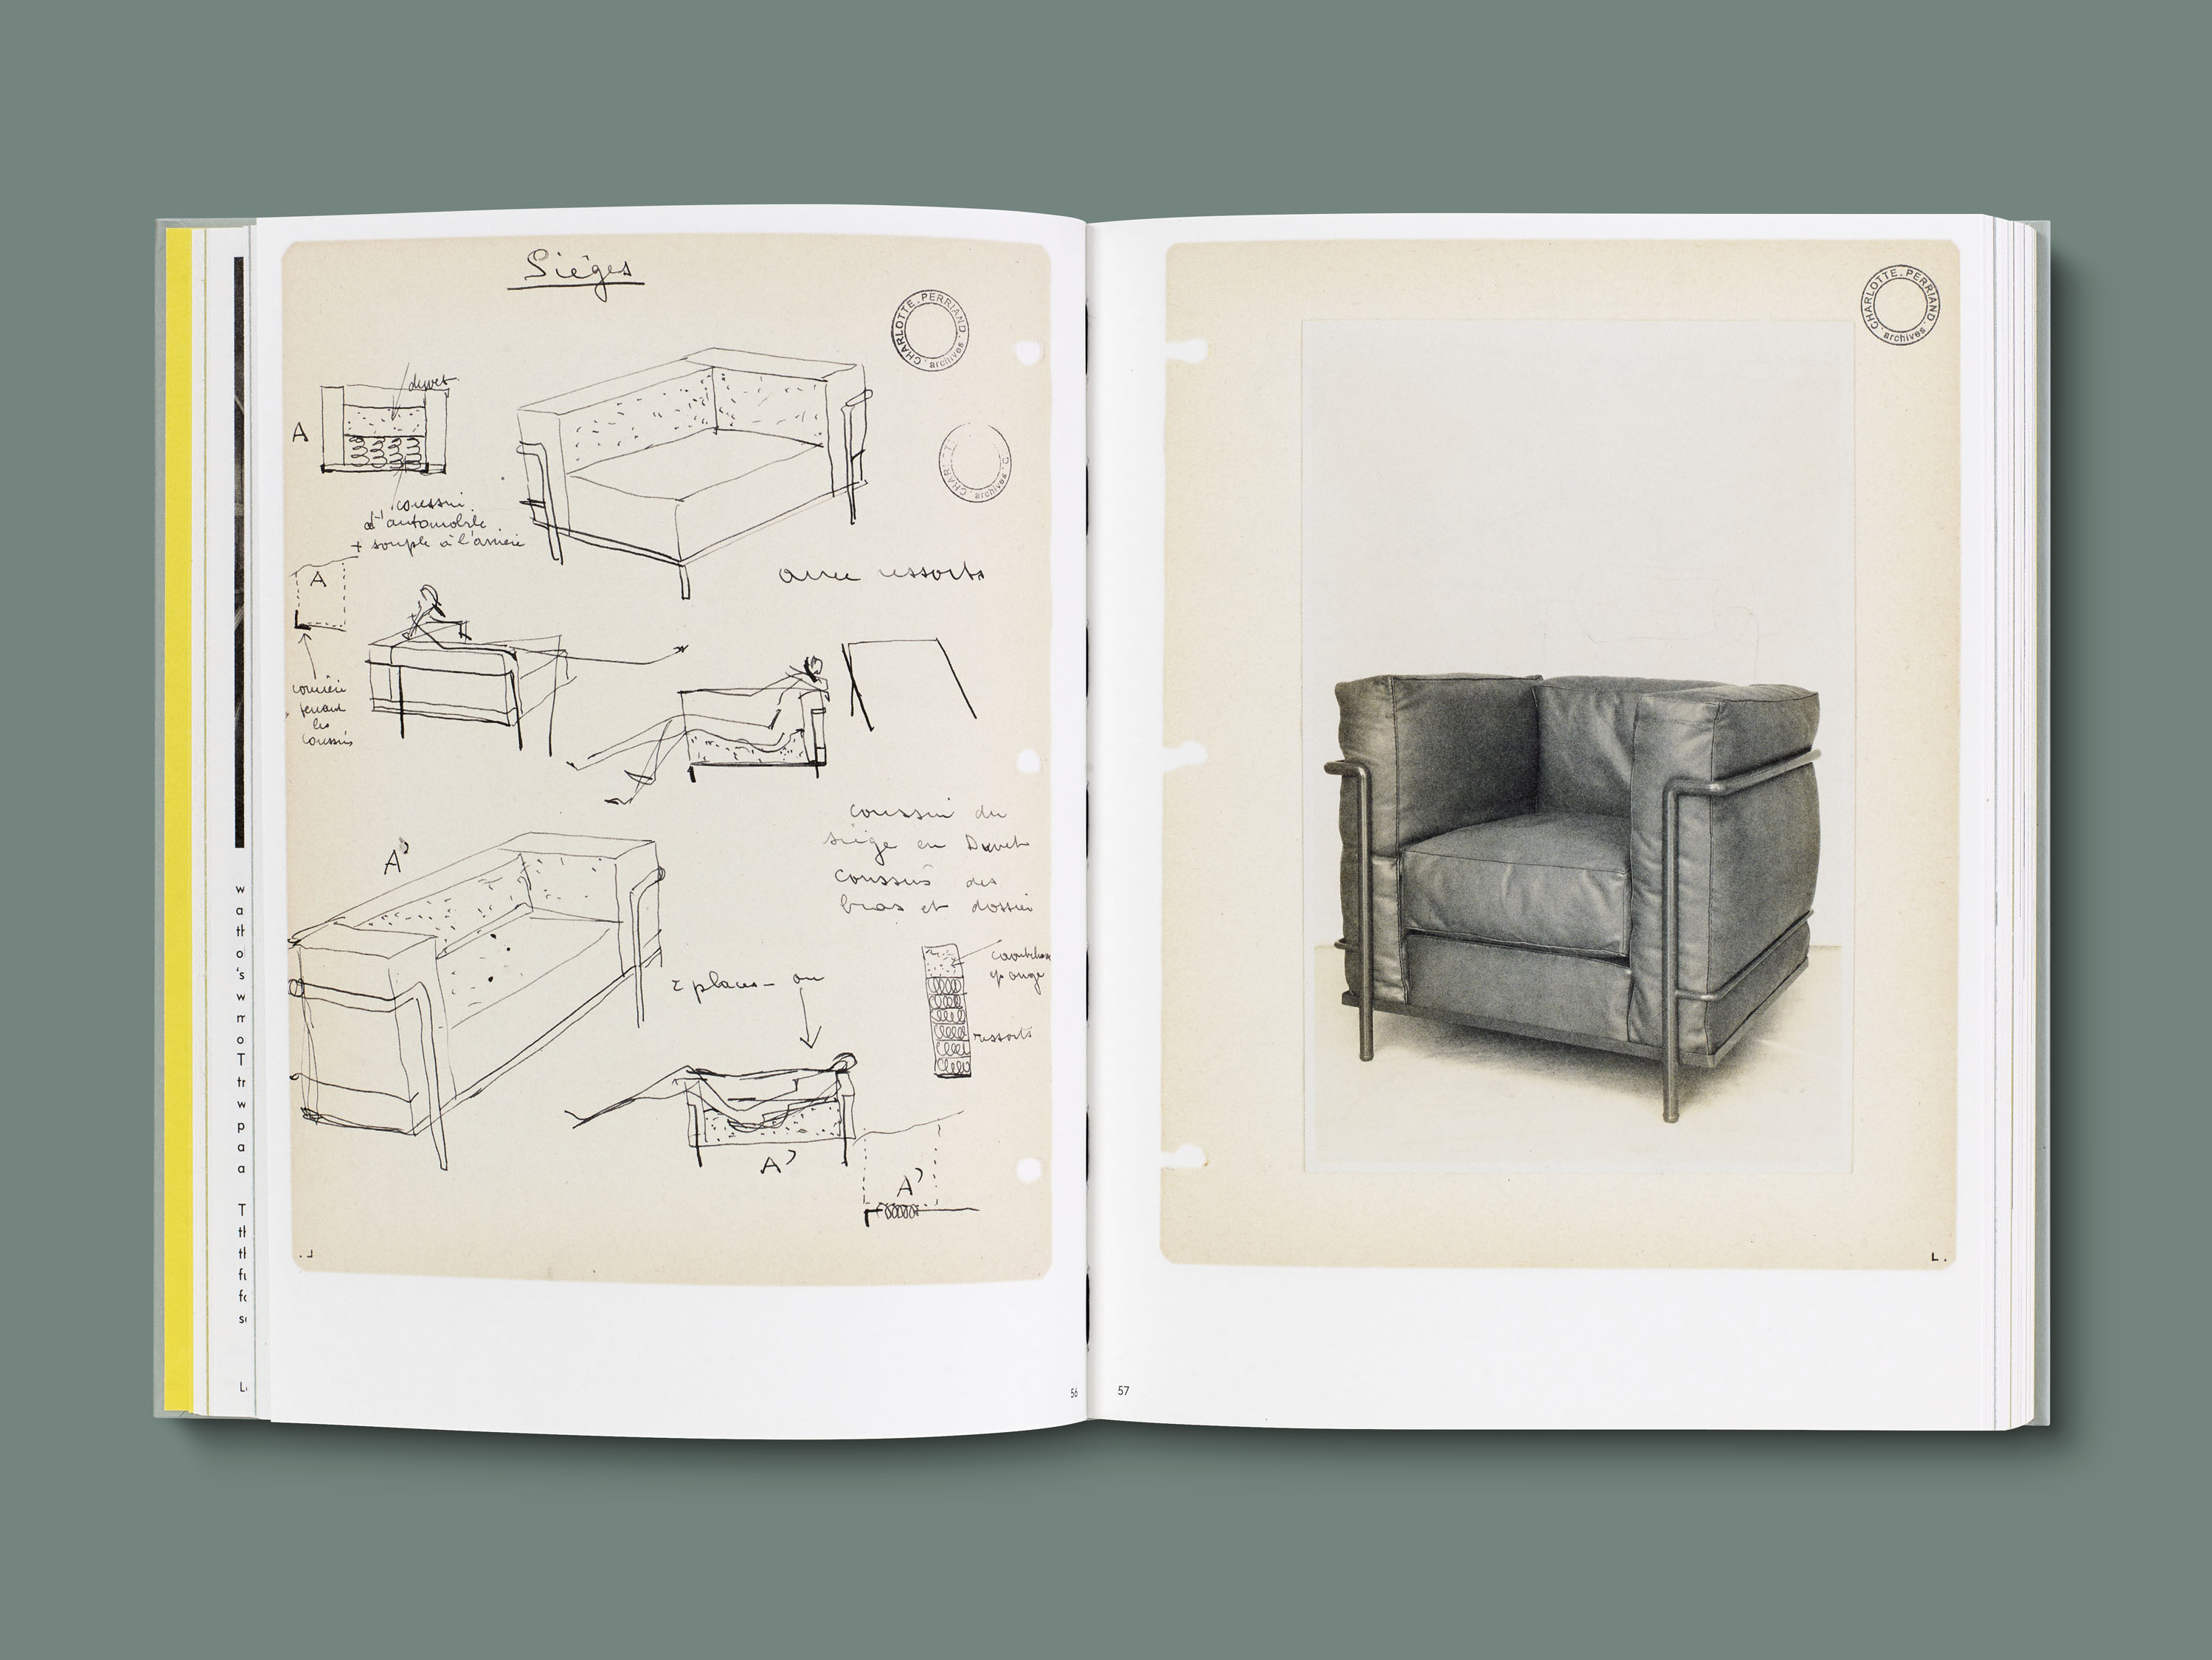 Charlotte Perriand's notebooks